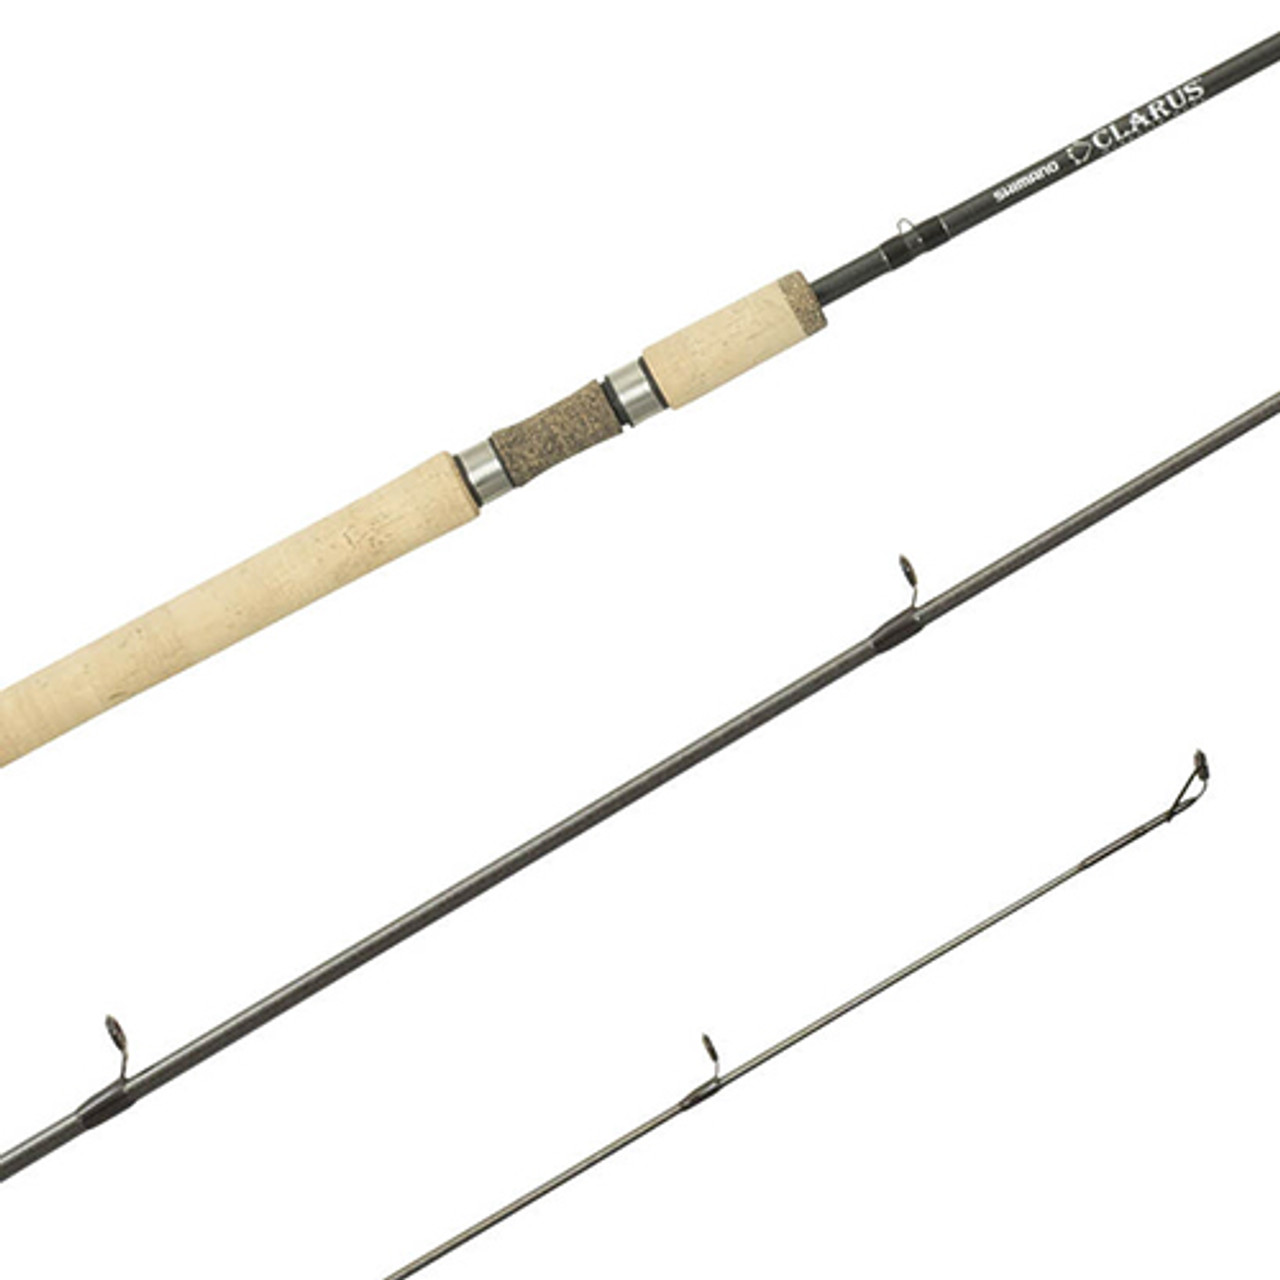 Shimano Clarus Mooching Rod - 106 MH 2PC D - The Harbour Chandler